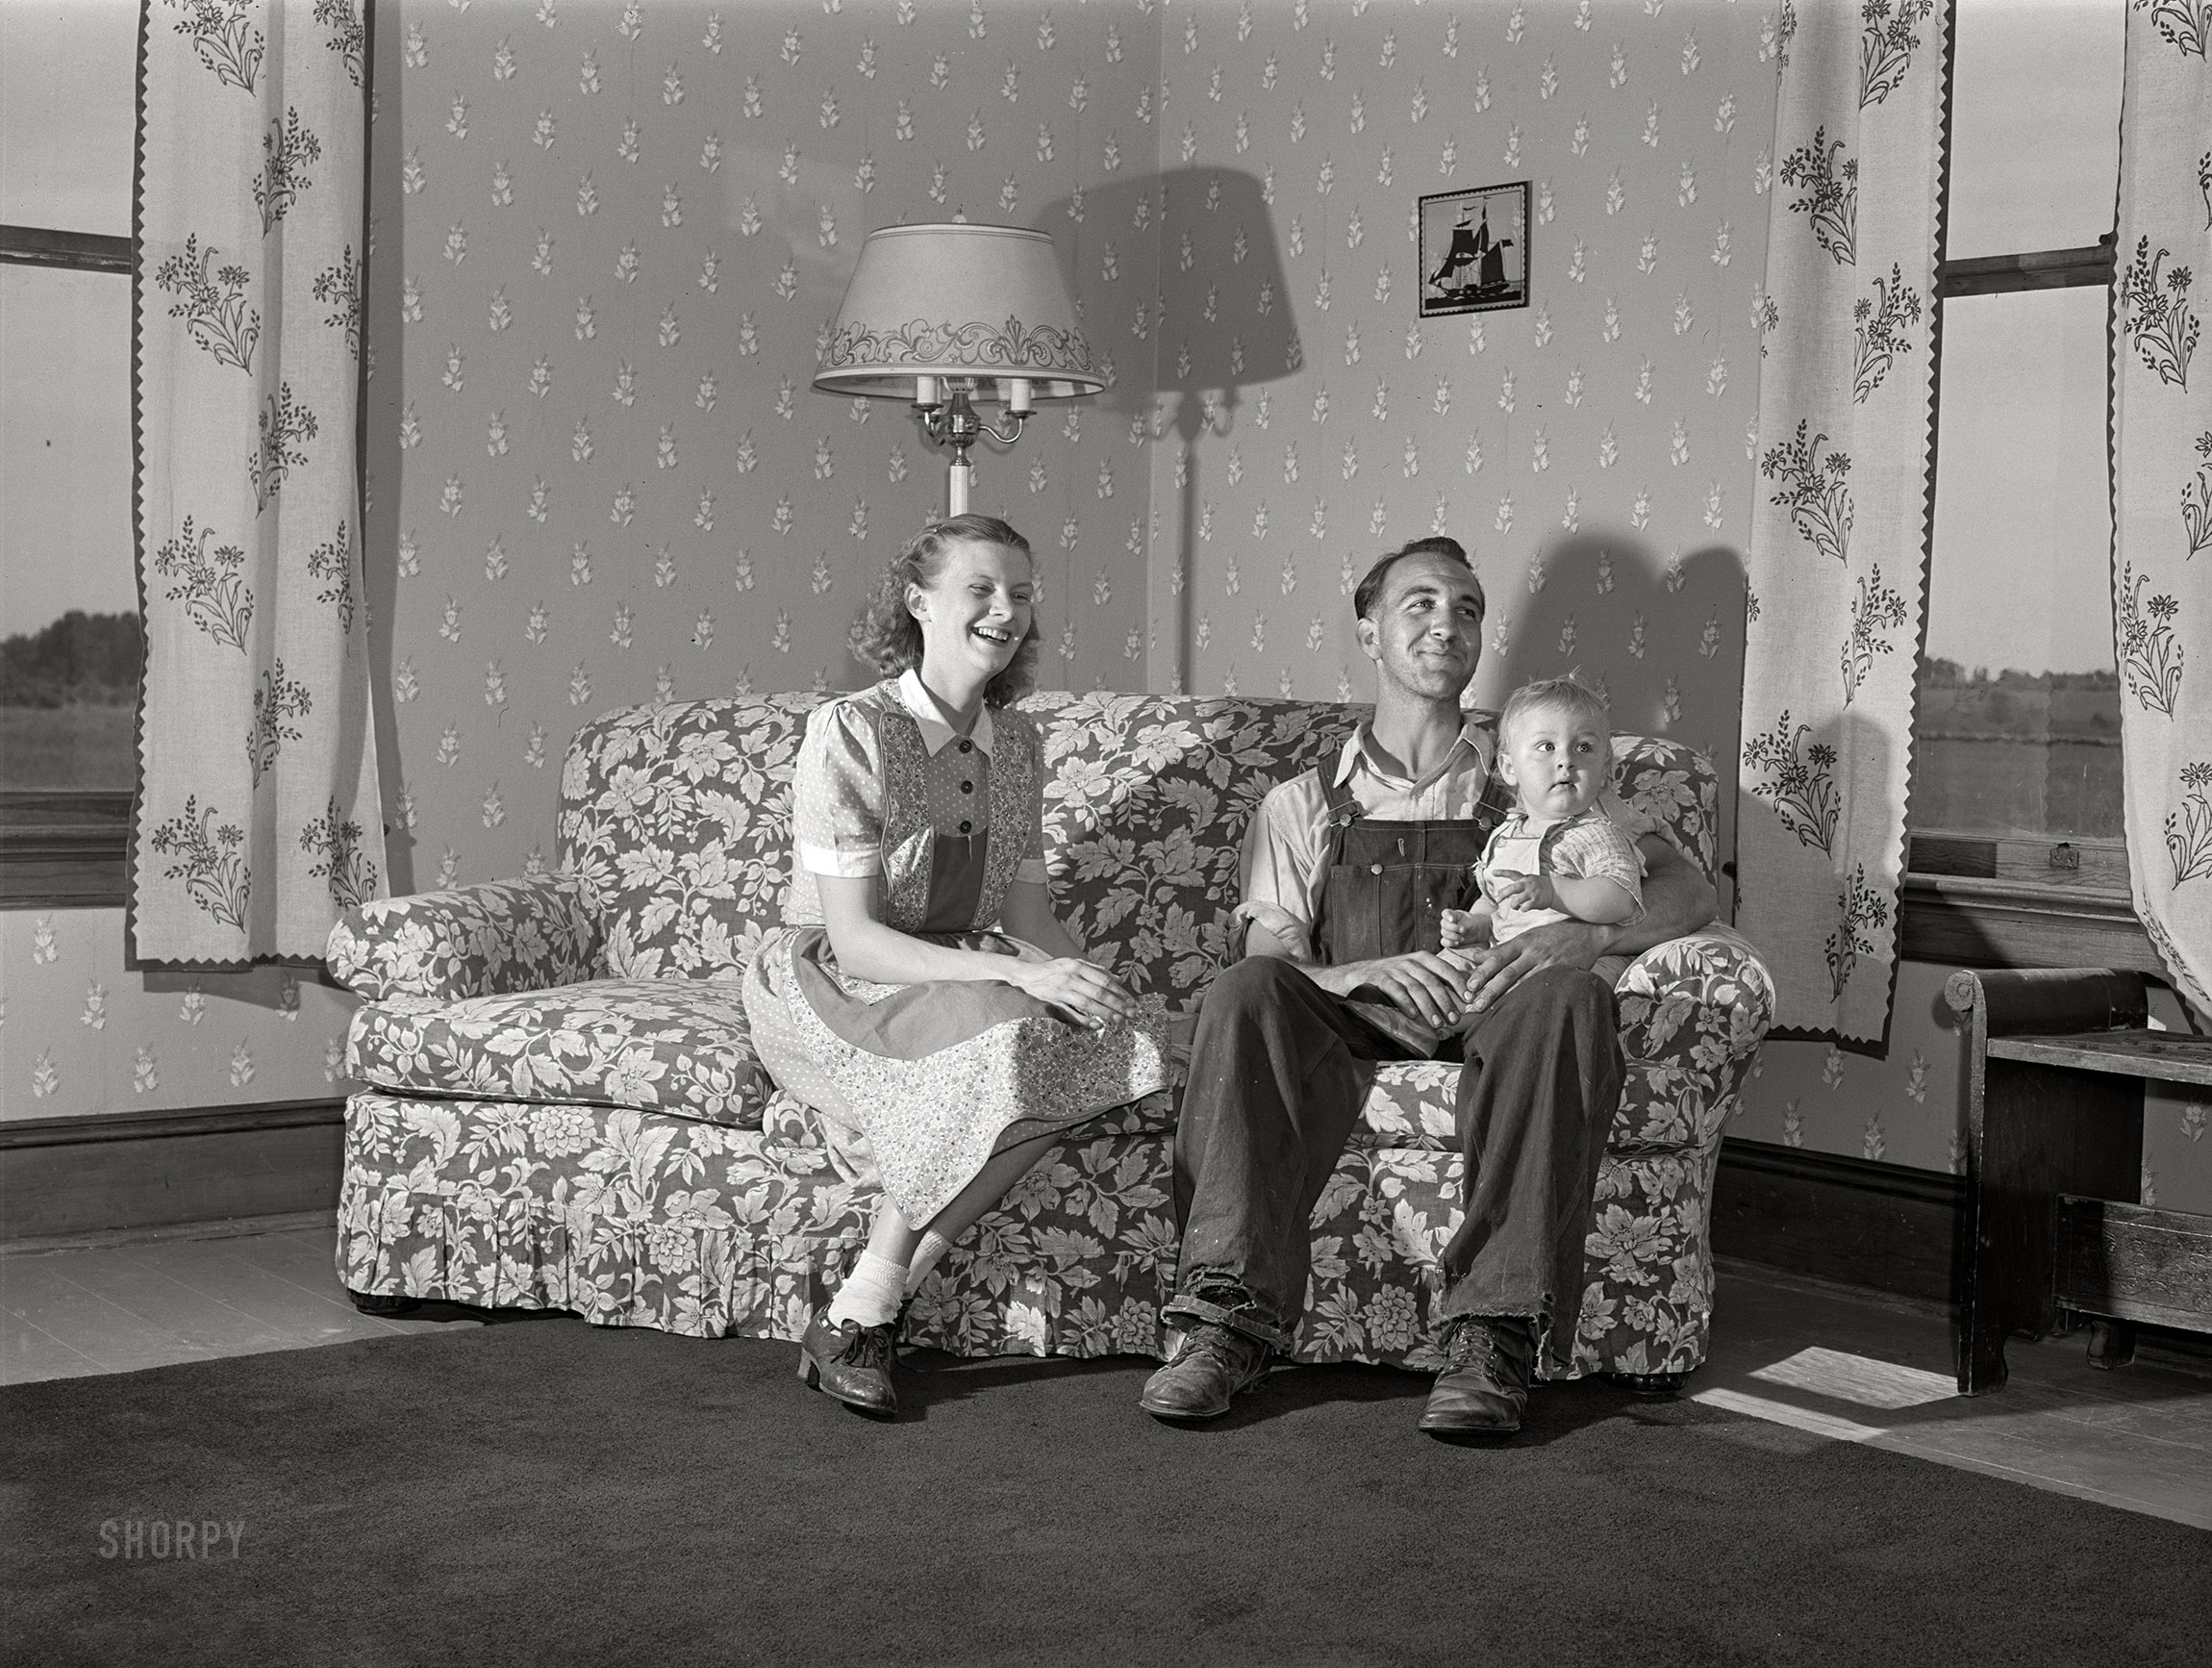 July 1940. Door County, Wisconsin. "Farm Security Administration rehabilitation borrower and family. The wife made the drapes, the chair covers, and papered the wall herself." Medium format negative by John Vachon for the Resettlement Administration. View full size.